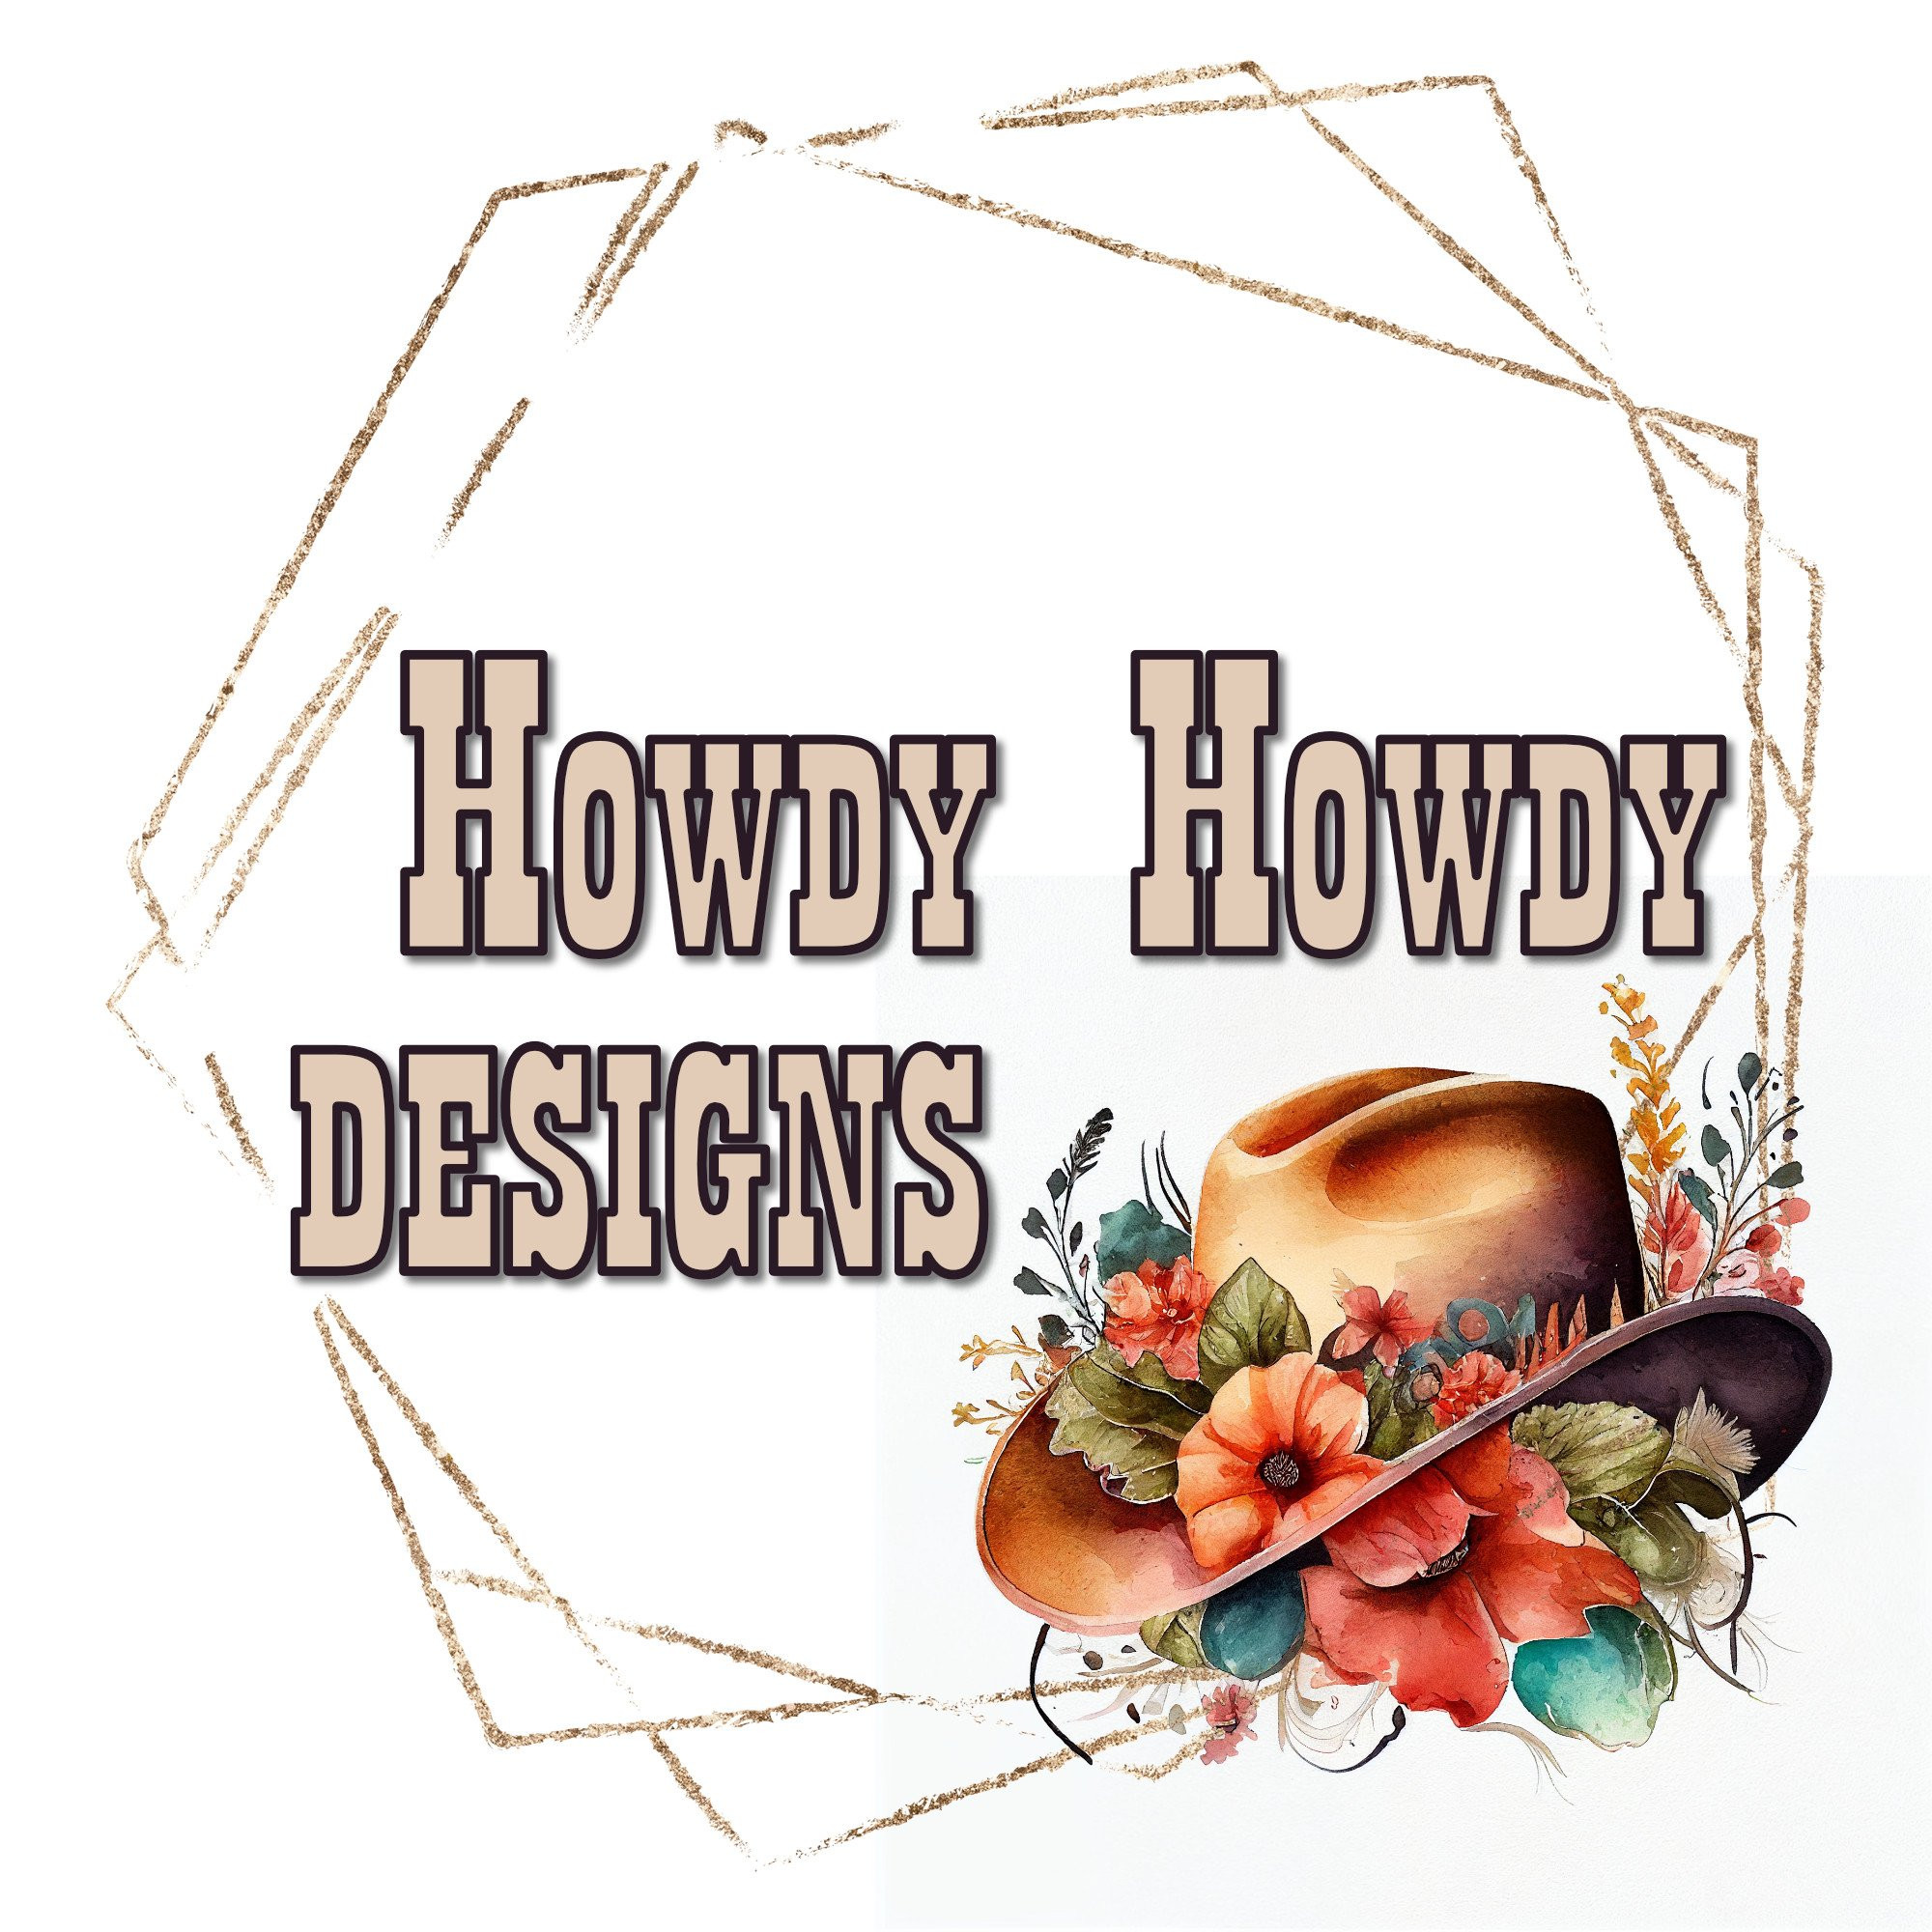 HowdyHowdyDesigns's profile picture